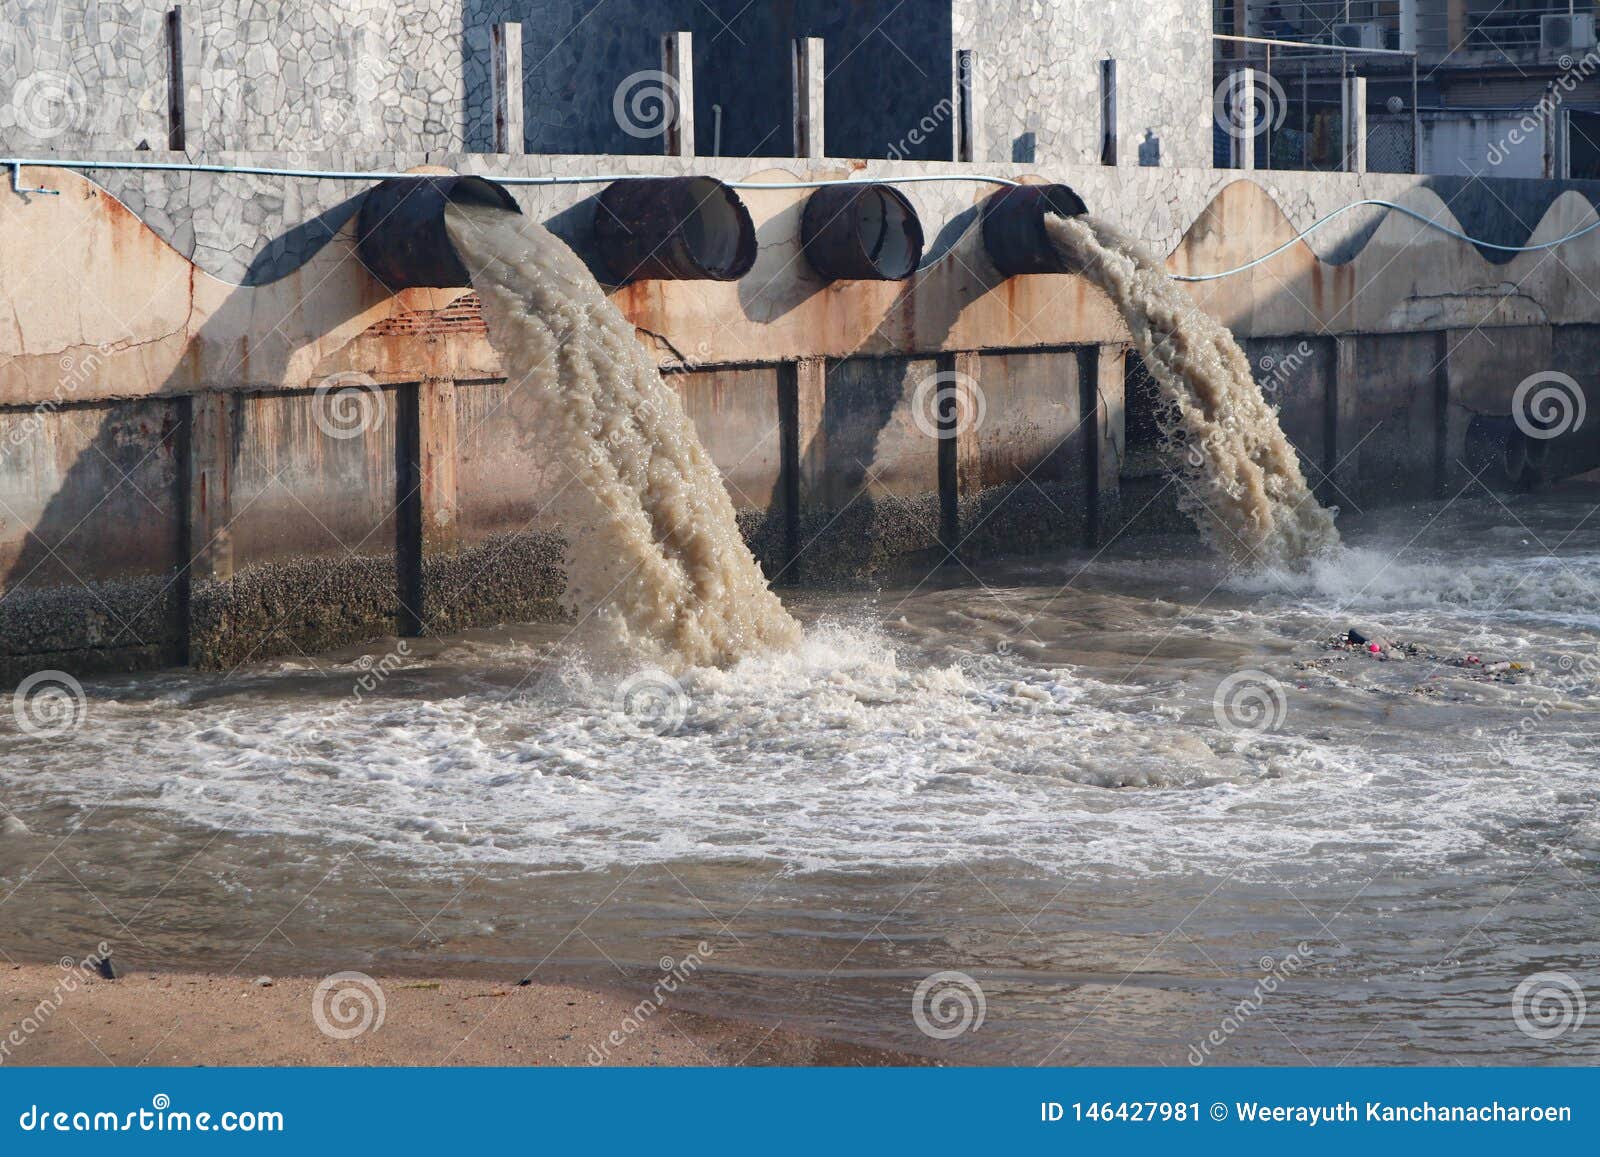 Waste Water Discharge Pipe into Canal and Sea Stock Image - Image of ...